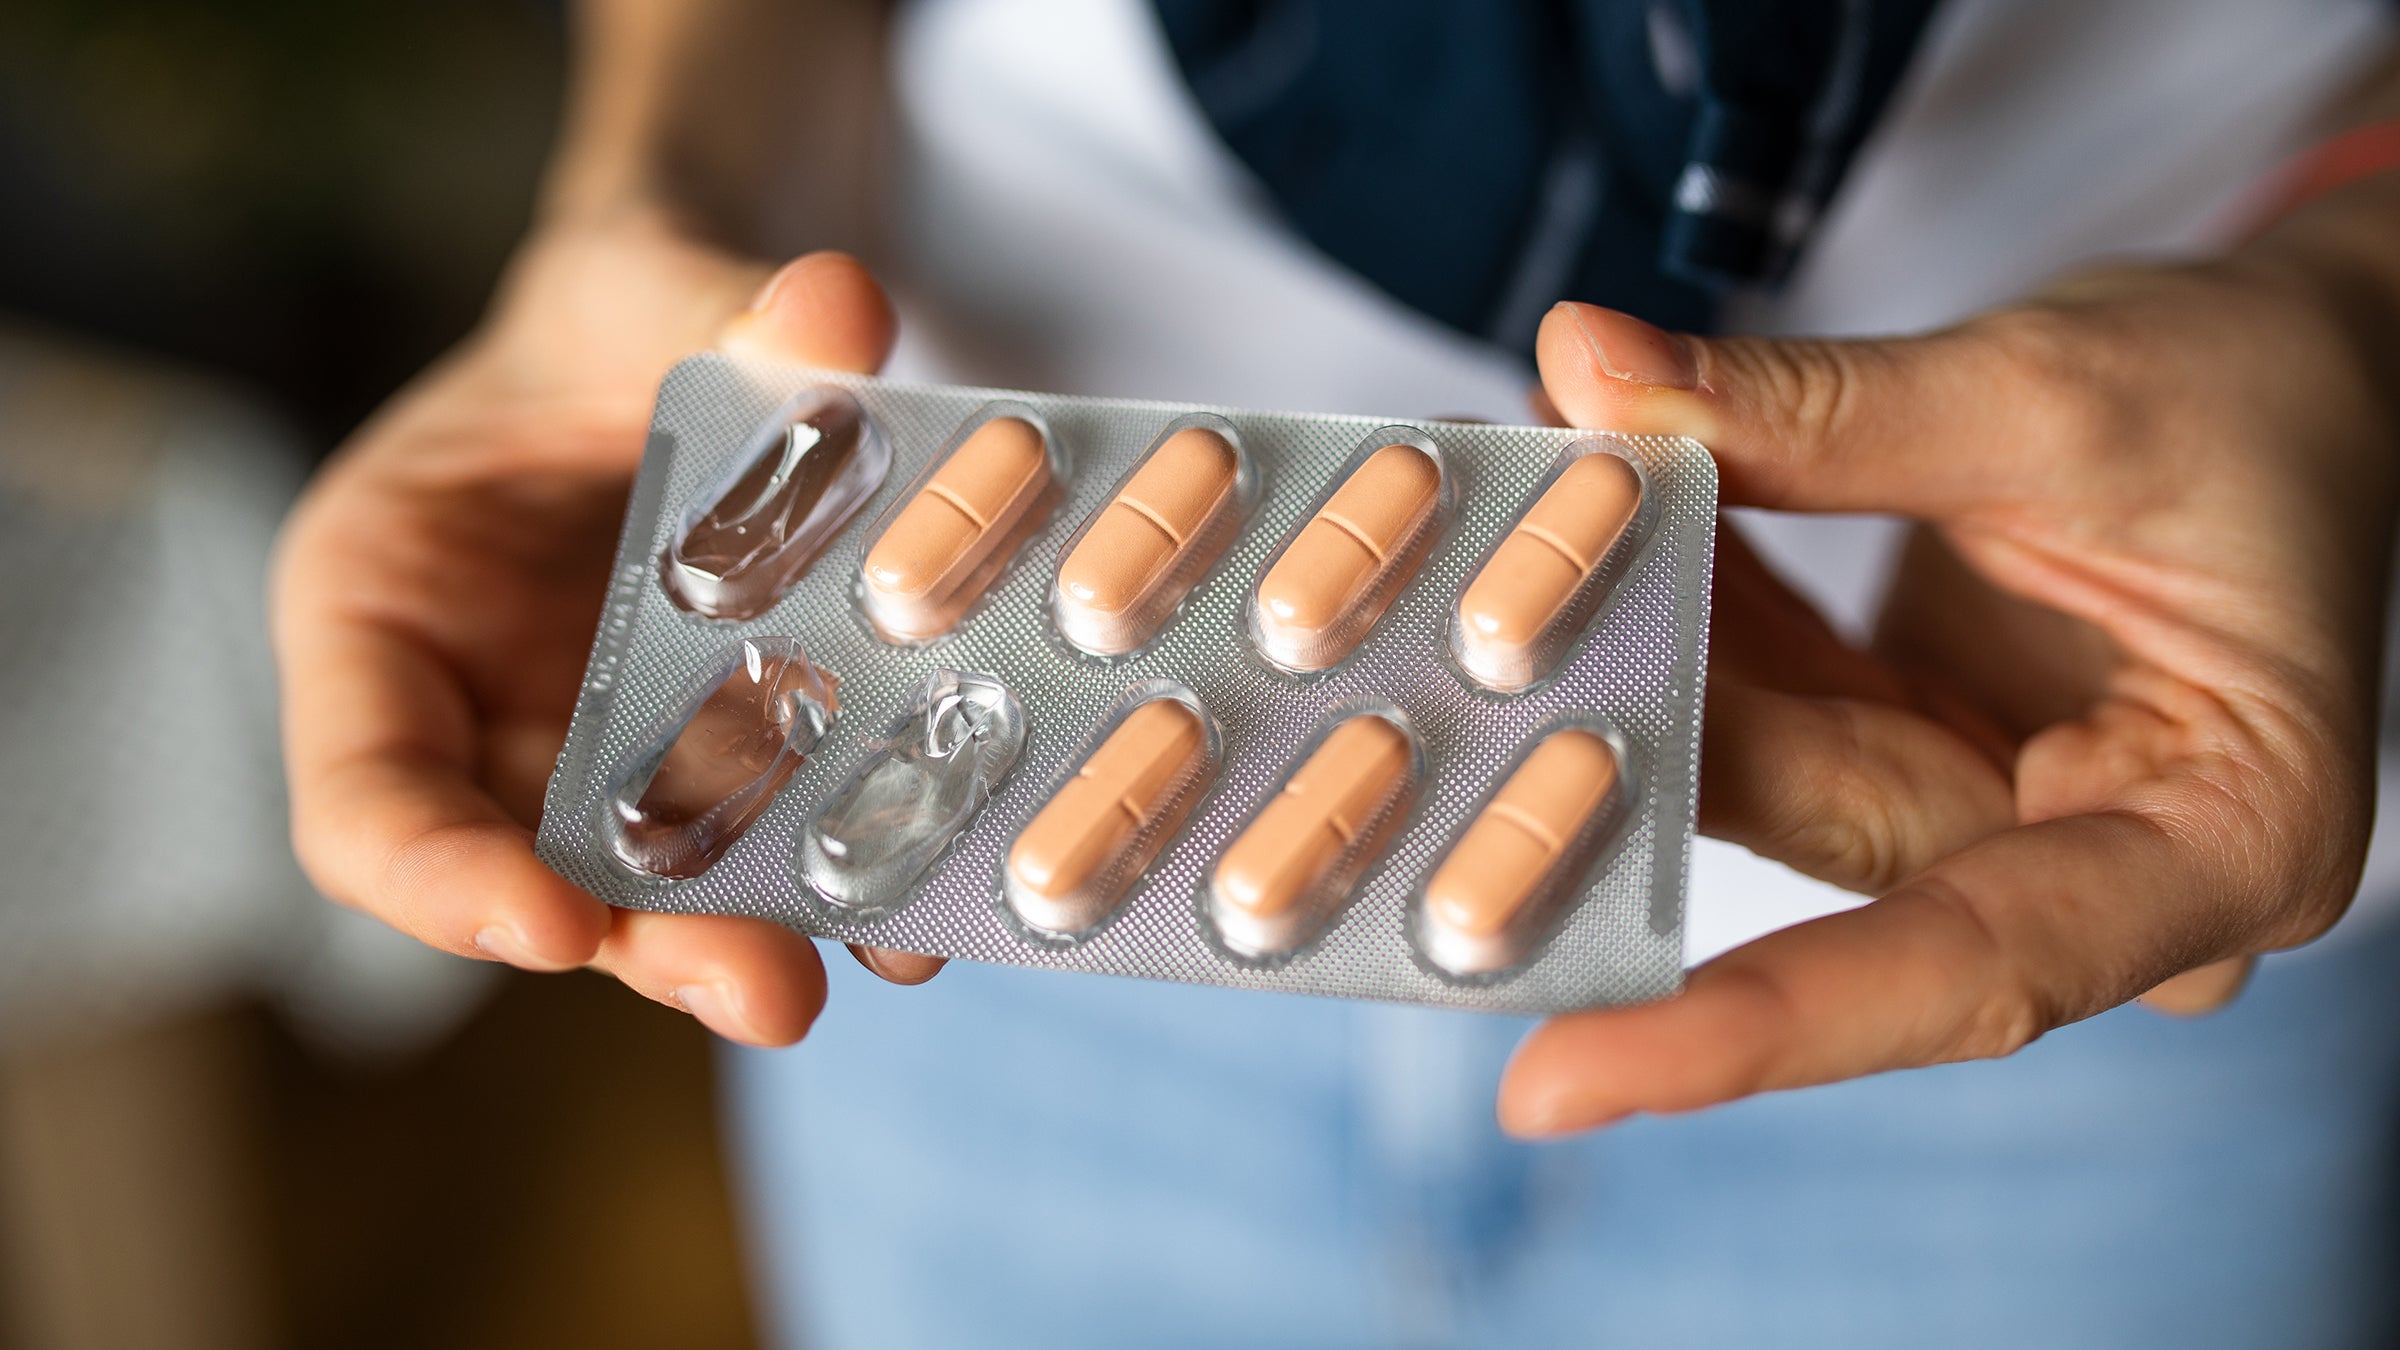 What You Should Know About Getting Abortion Pills - GoodRx